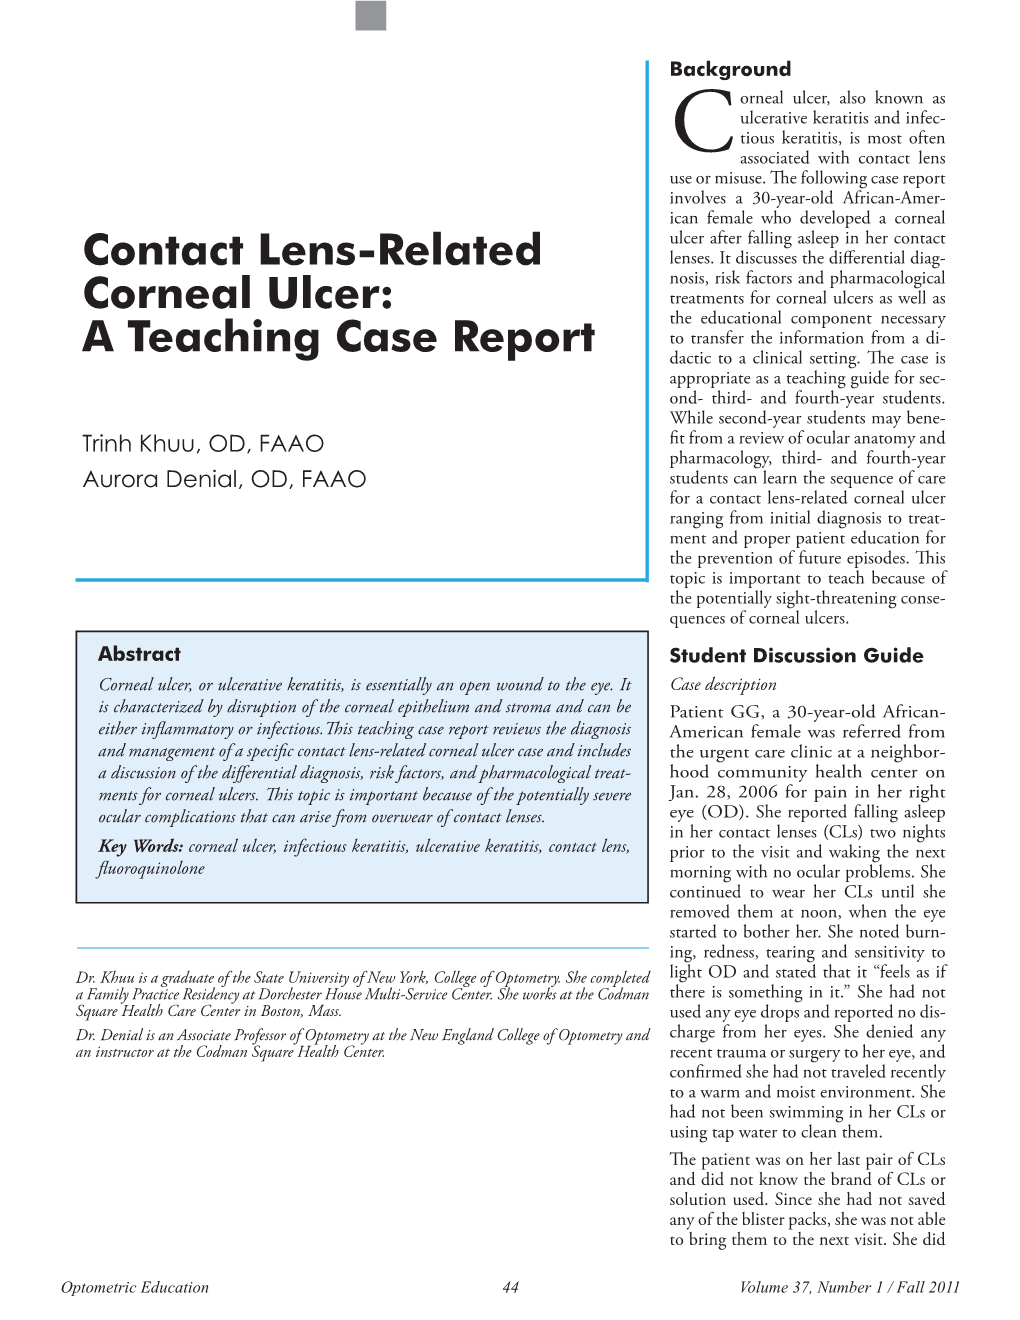 Contact Lens-Related Corneal Ulcer: a Teaching Case Report